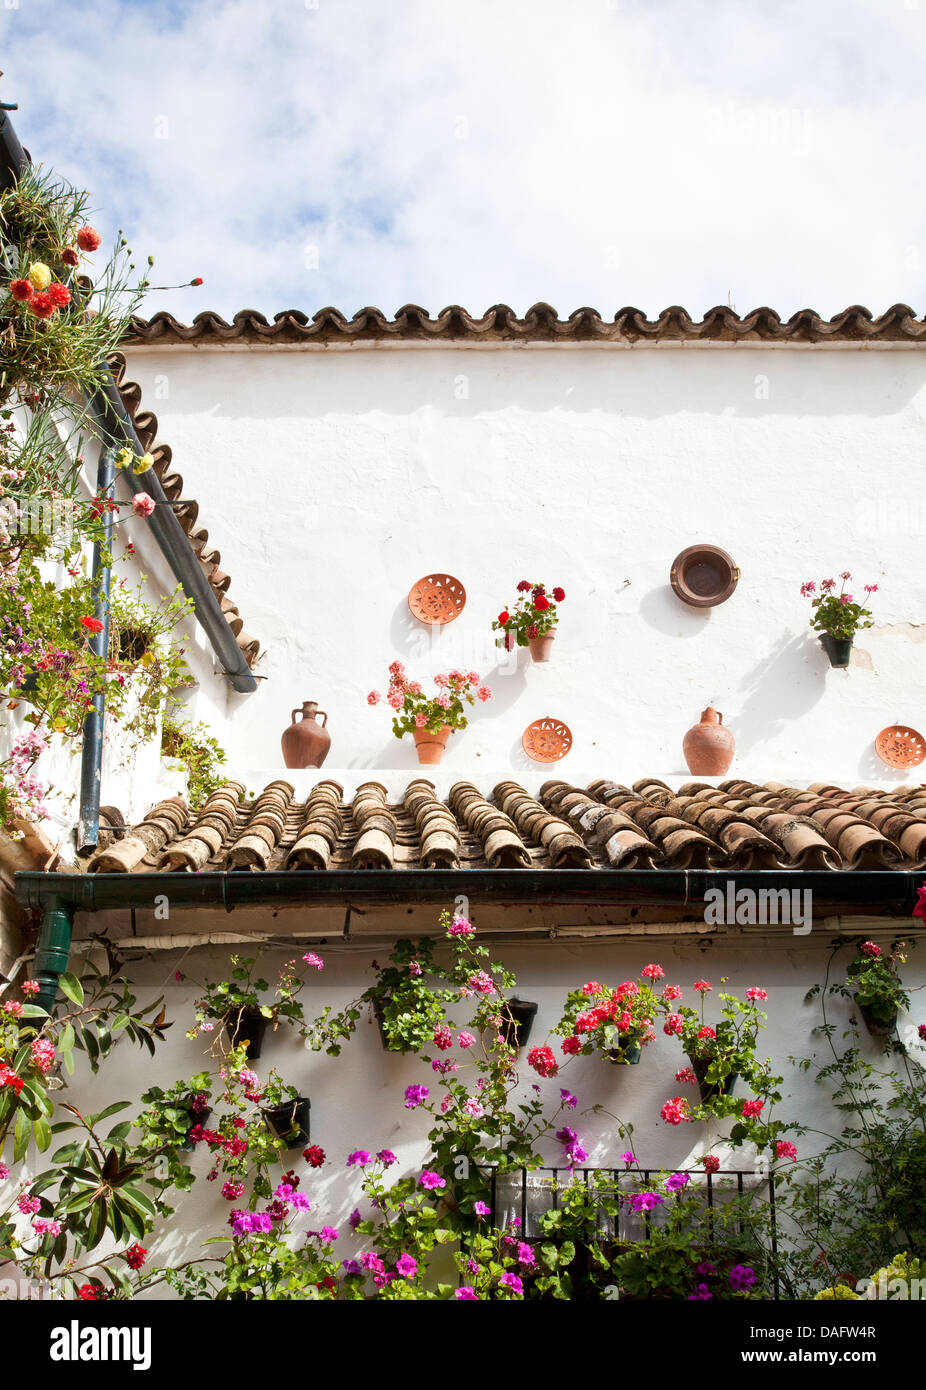 HOUSE DECORATED WITH FLOWERPOTS. Stock Photo